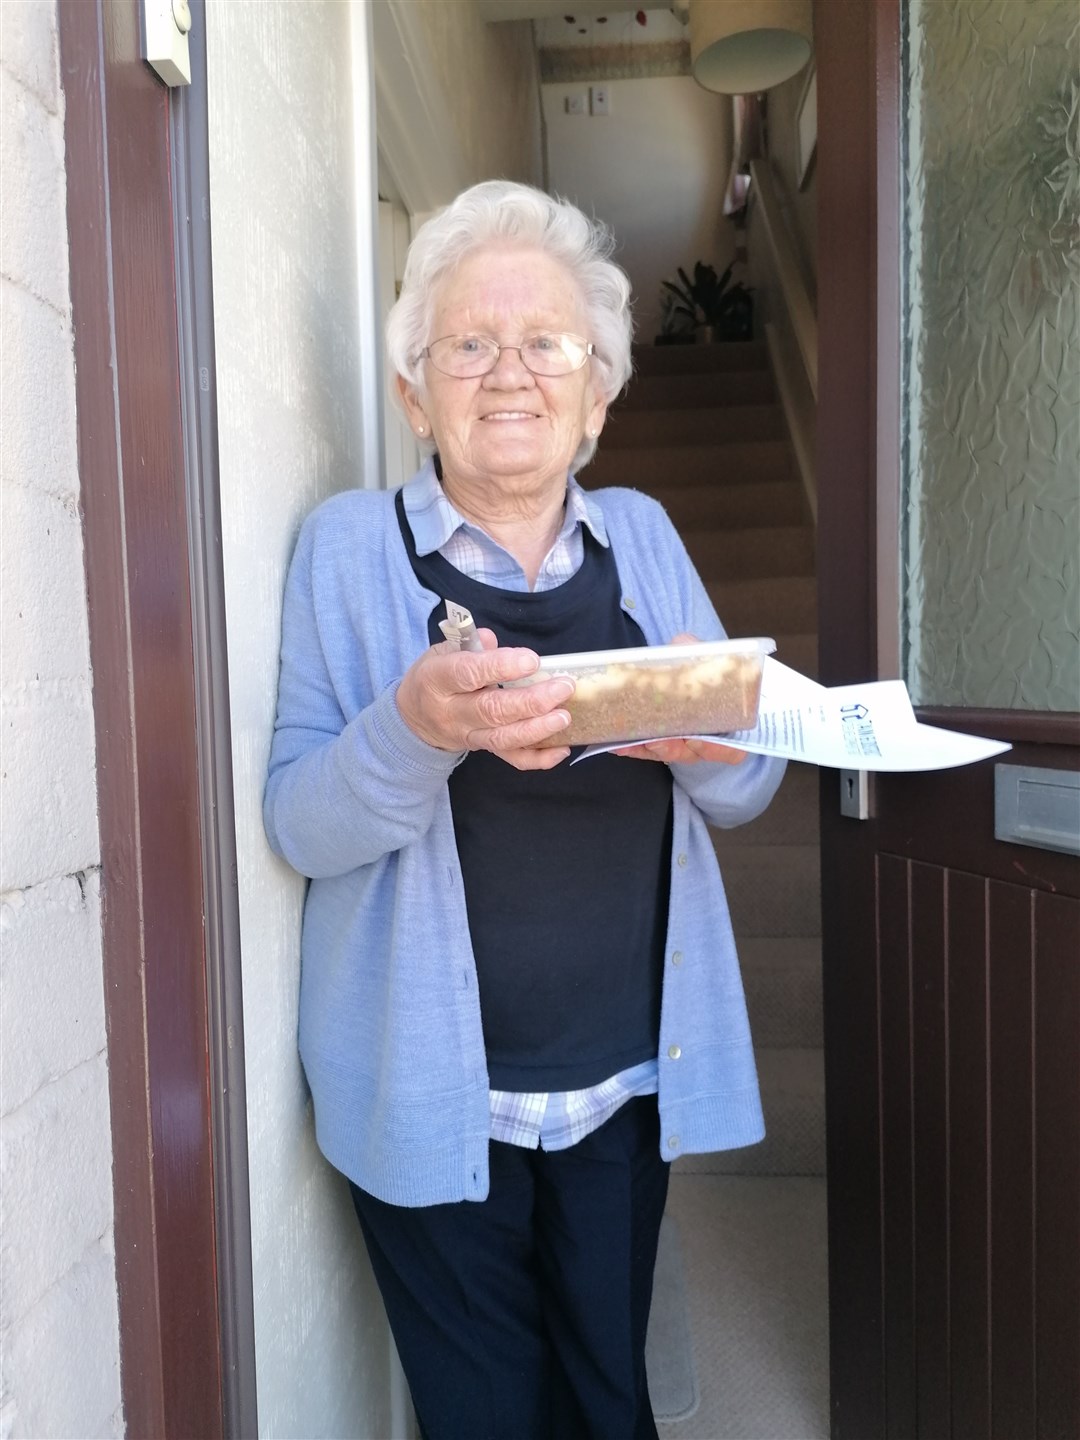 Mina MacDonald with a meals on wheels delivery.